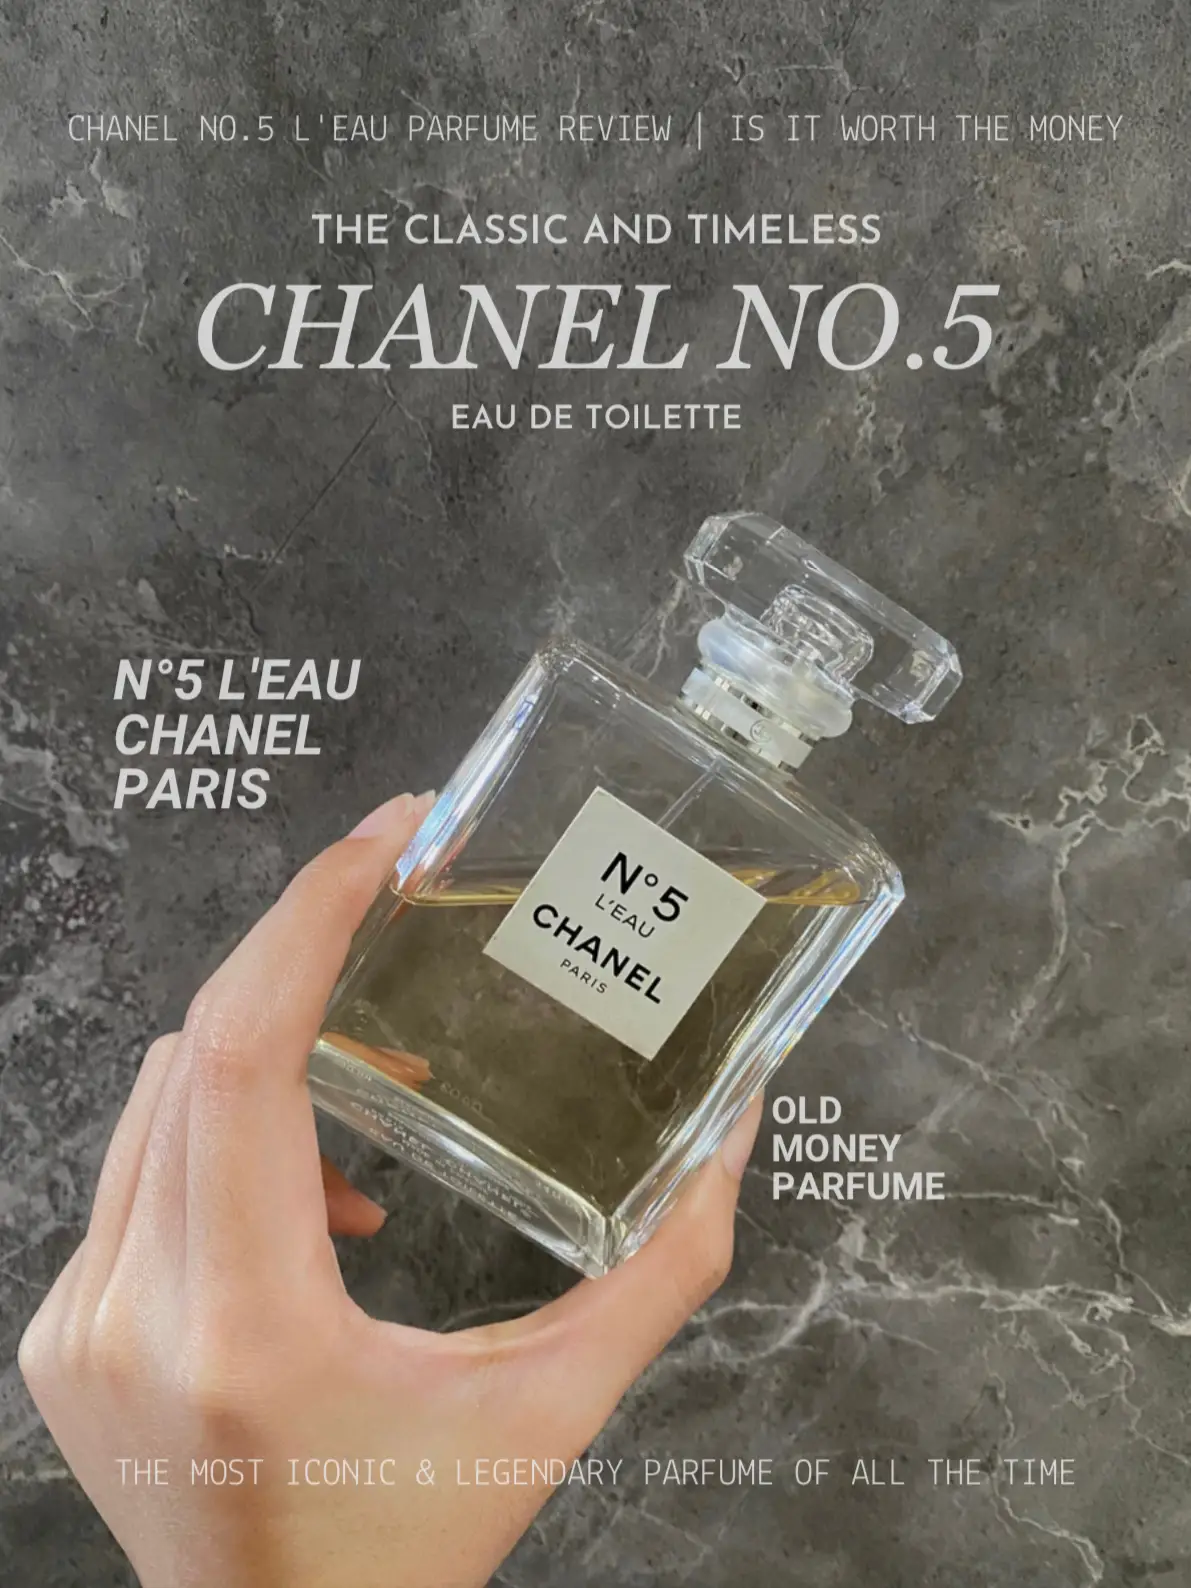 CHANEL N°5 L'EAU PARFUME🌝💫, Gallery posted by evelyn